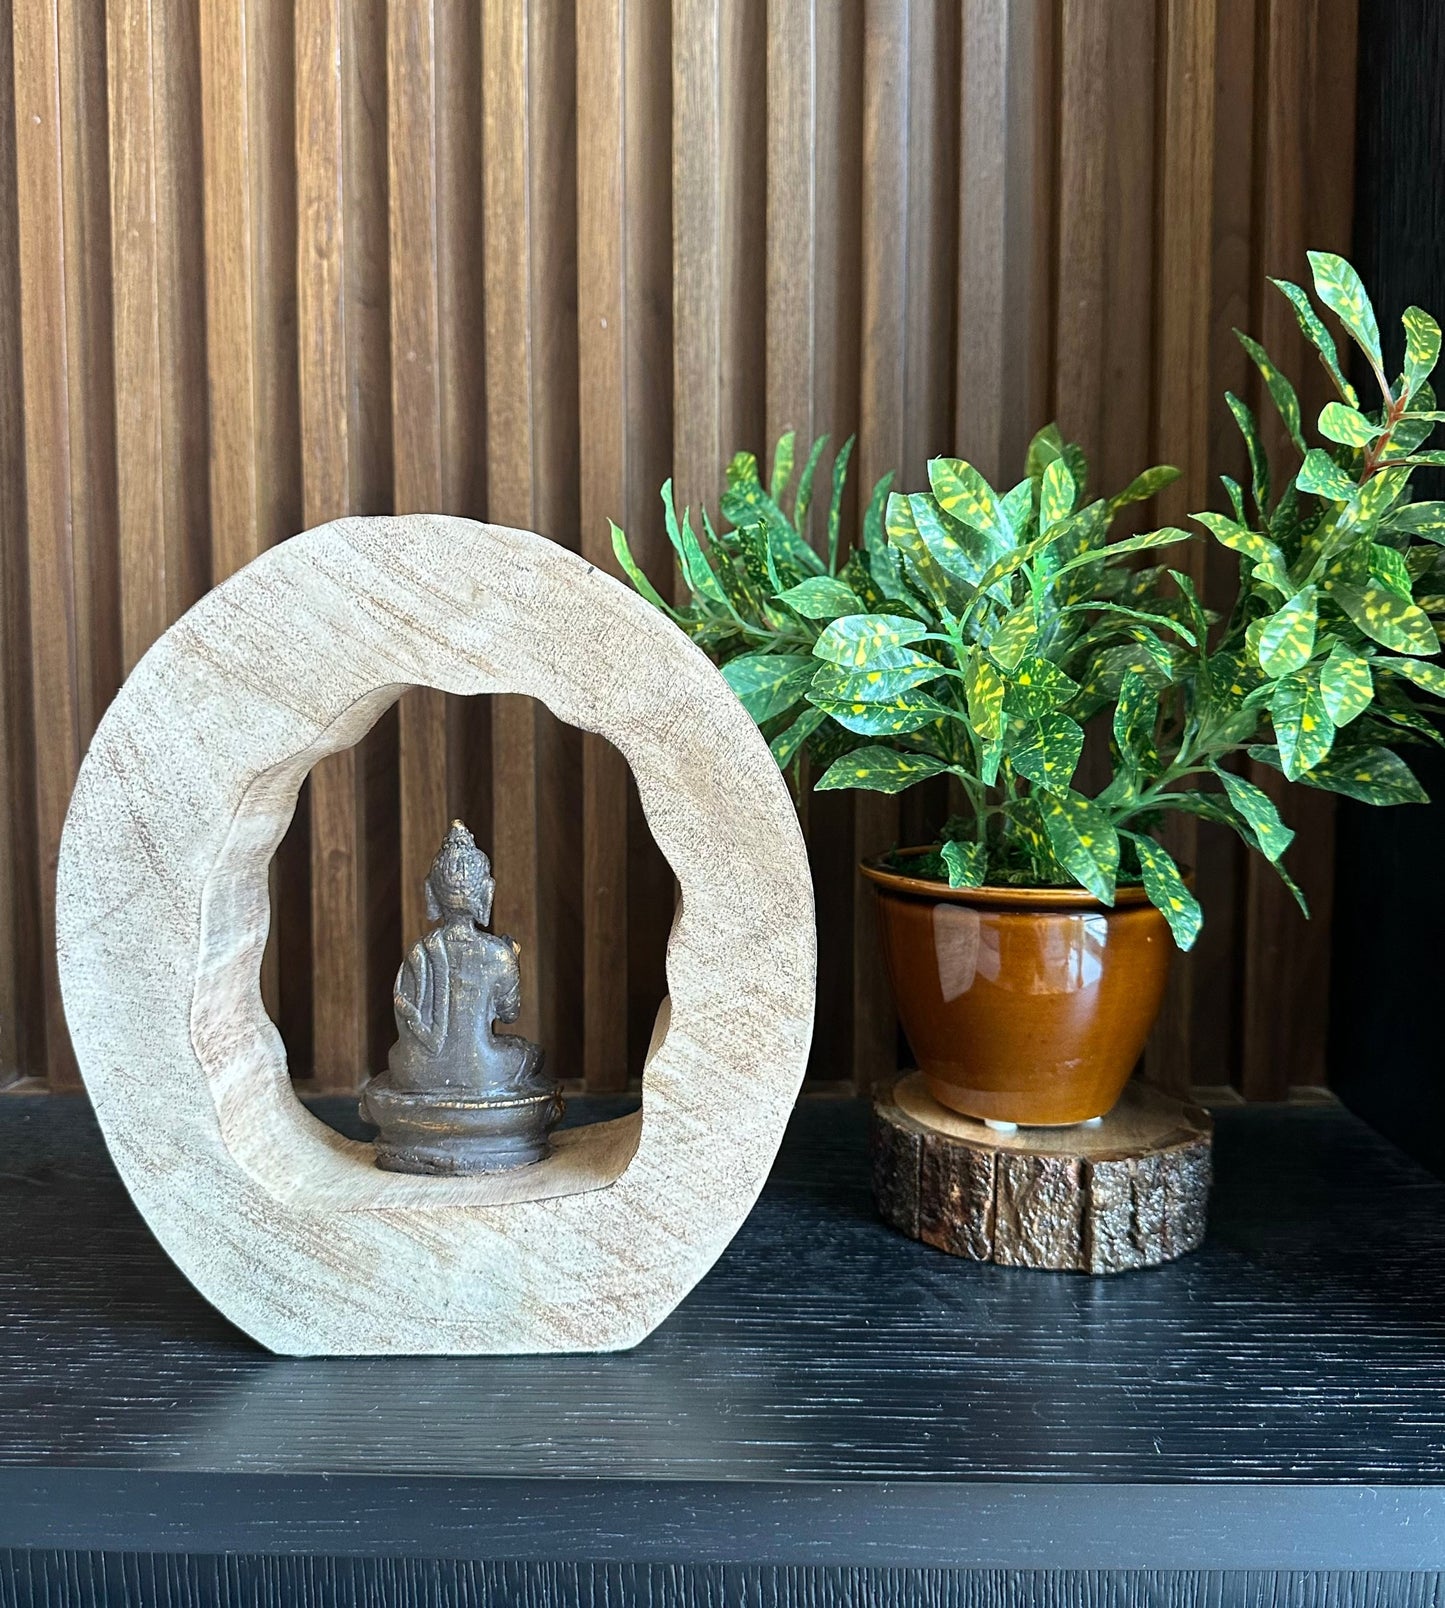 Buddha in Wooden Frame